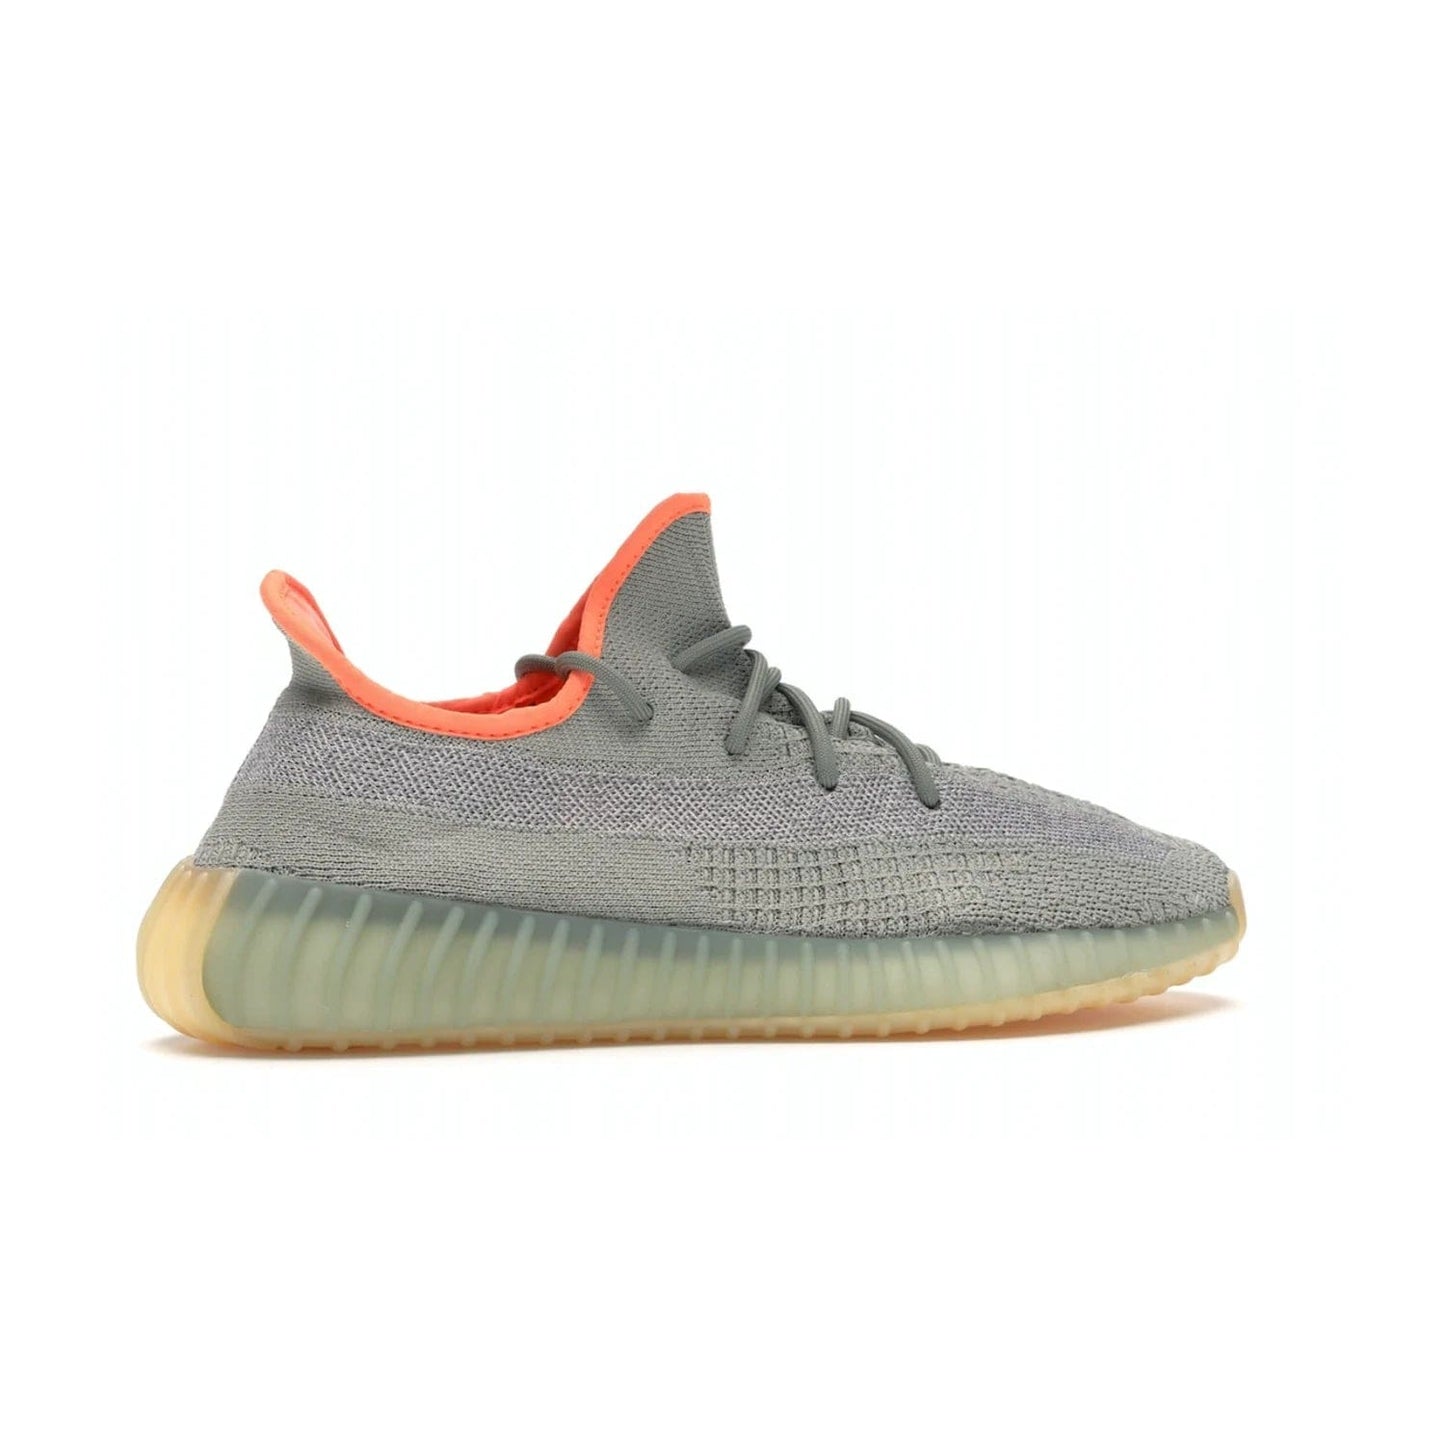 adidas Yeezy Boost 350 V2 Desert Sage - Image 35 - Only at www.BallersClubKickz.com - Upgrade your style with the adidas Yeezy Boost 350 V2 Desert Sage. This 350V2 features a Desert Sage primeknit upper with tonal side stripe, and an orange-highlighted translucent Boost cushioning sole. Stay on-trend in effortless style.